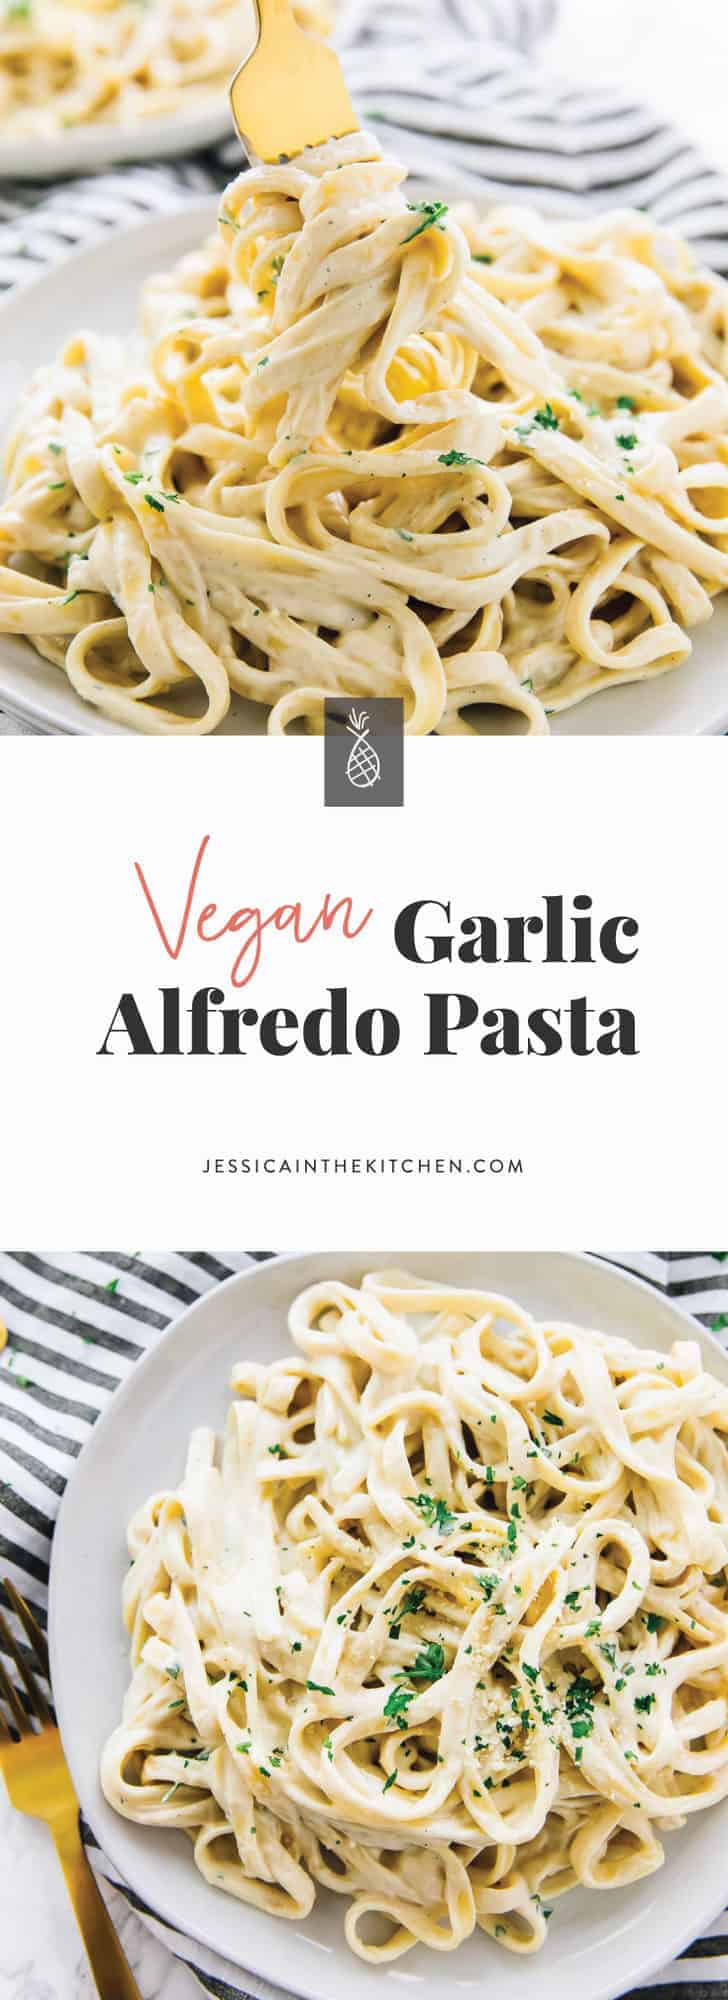 This Vegan Garlic Alfredo Pasta is such a creamy and cheesy weeknight dinner! It's absolutely decadent, made with a cashew cream sauce, and the sauce is made easily in your blender! via https://jessicainthekitchen.com 